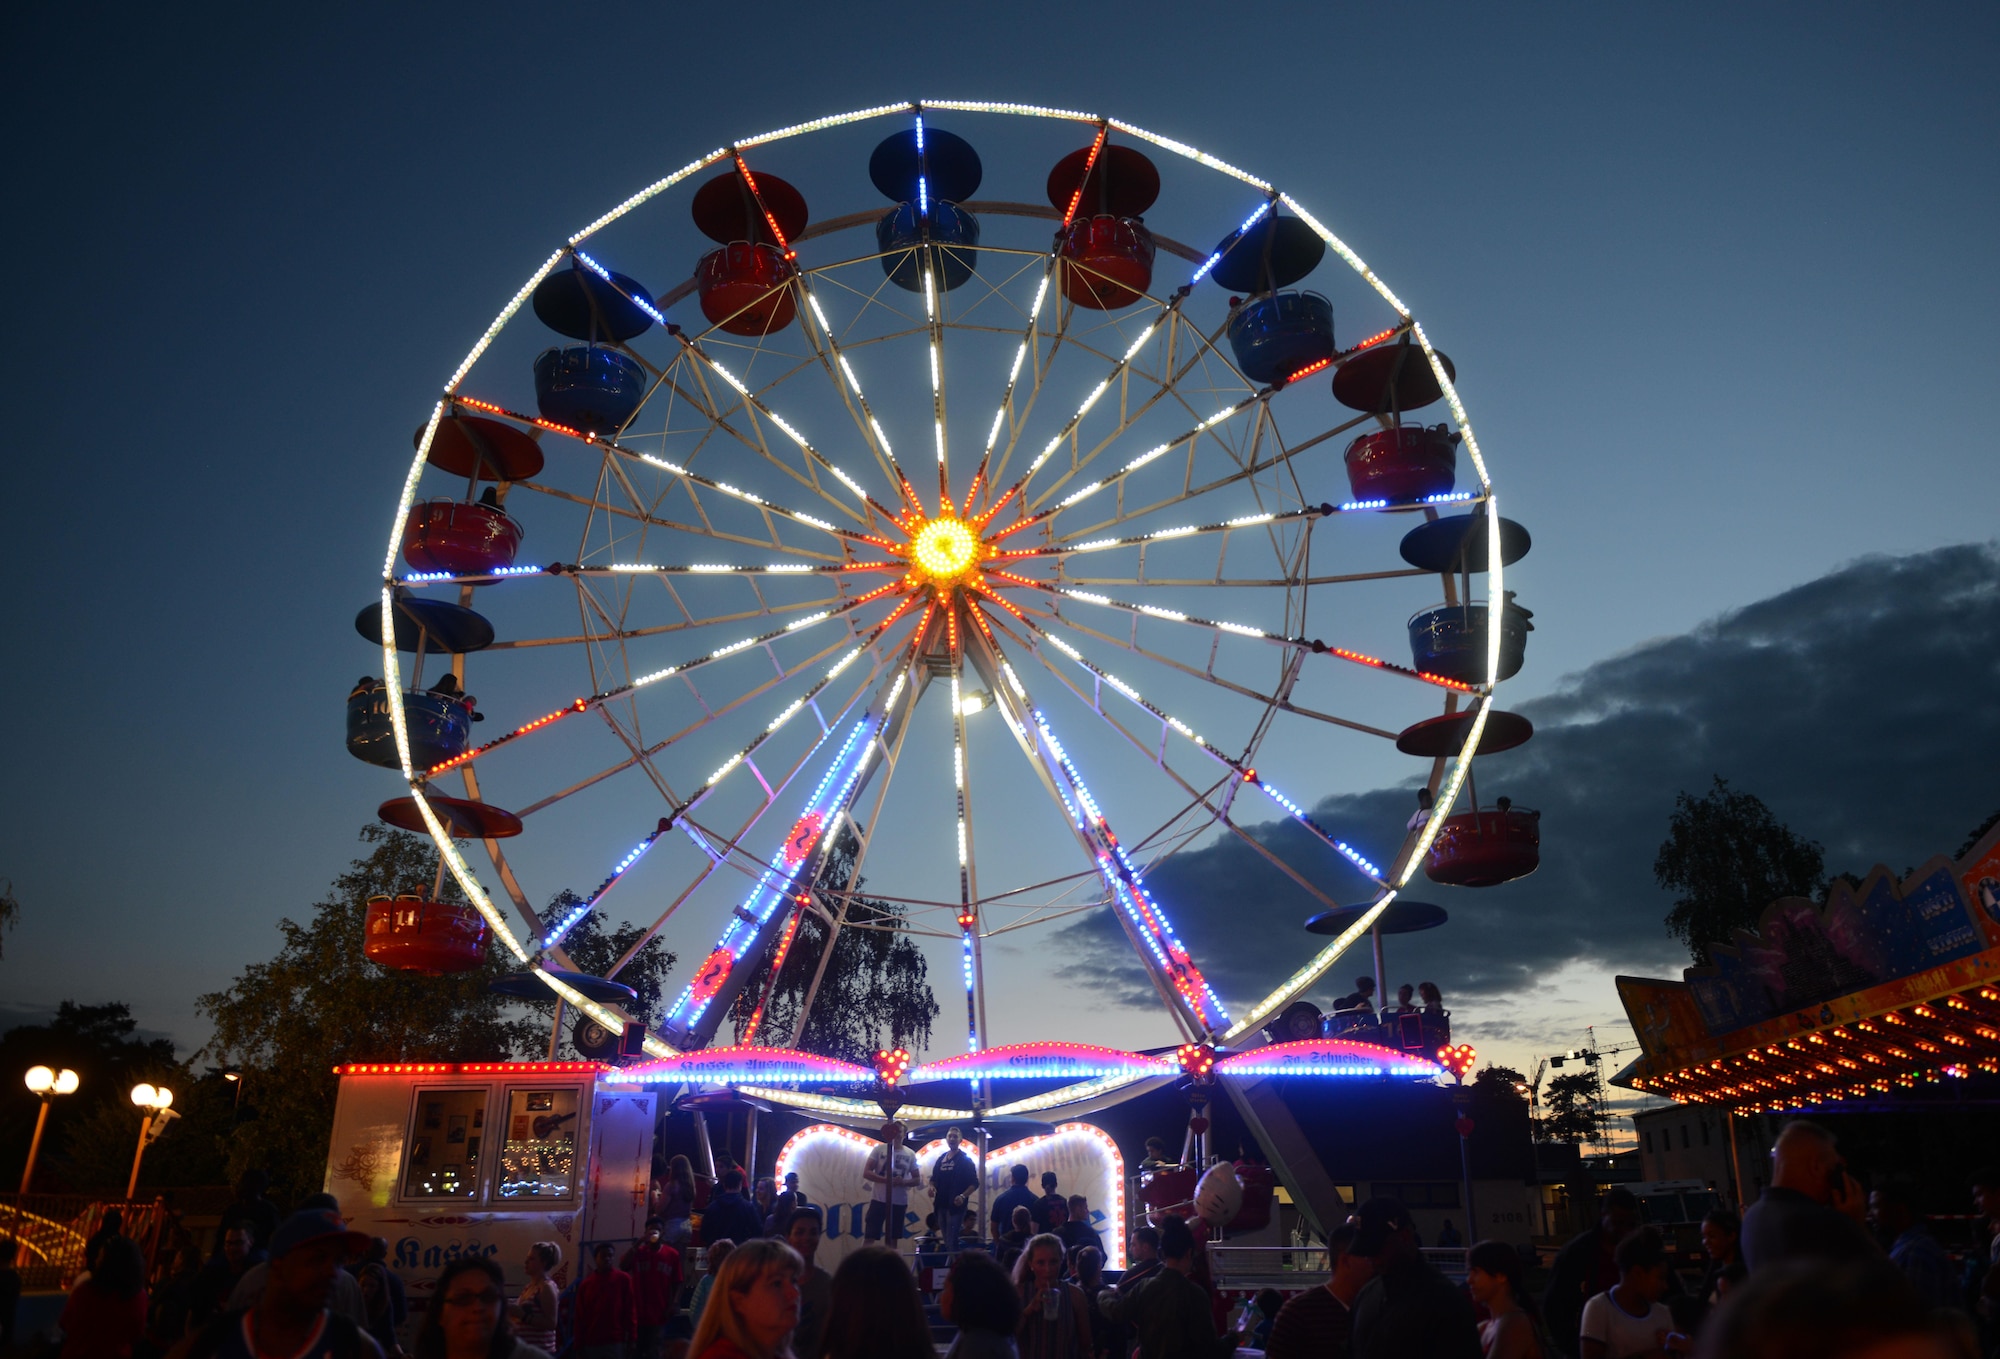 Carnival goers attend the Freedom Fest 2016 festivities at Ramstein Air Base, Germany, July 4, 2016. The Independence Day celebration included a variety of foods, games, rides and fireworks for Kaiserslautern Military Community members. The festival culminated with a fireworks display in the evening. (U.S. Air Force photo/ Airman 1st Class Joshua Magbanua)